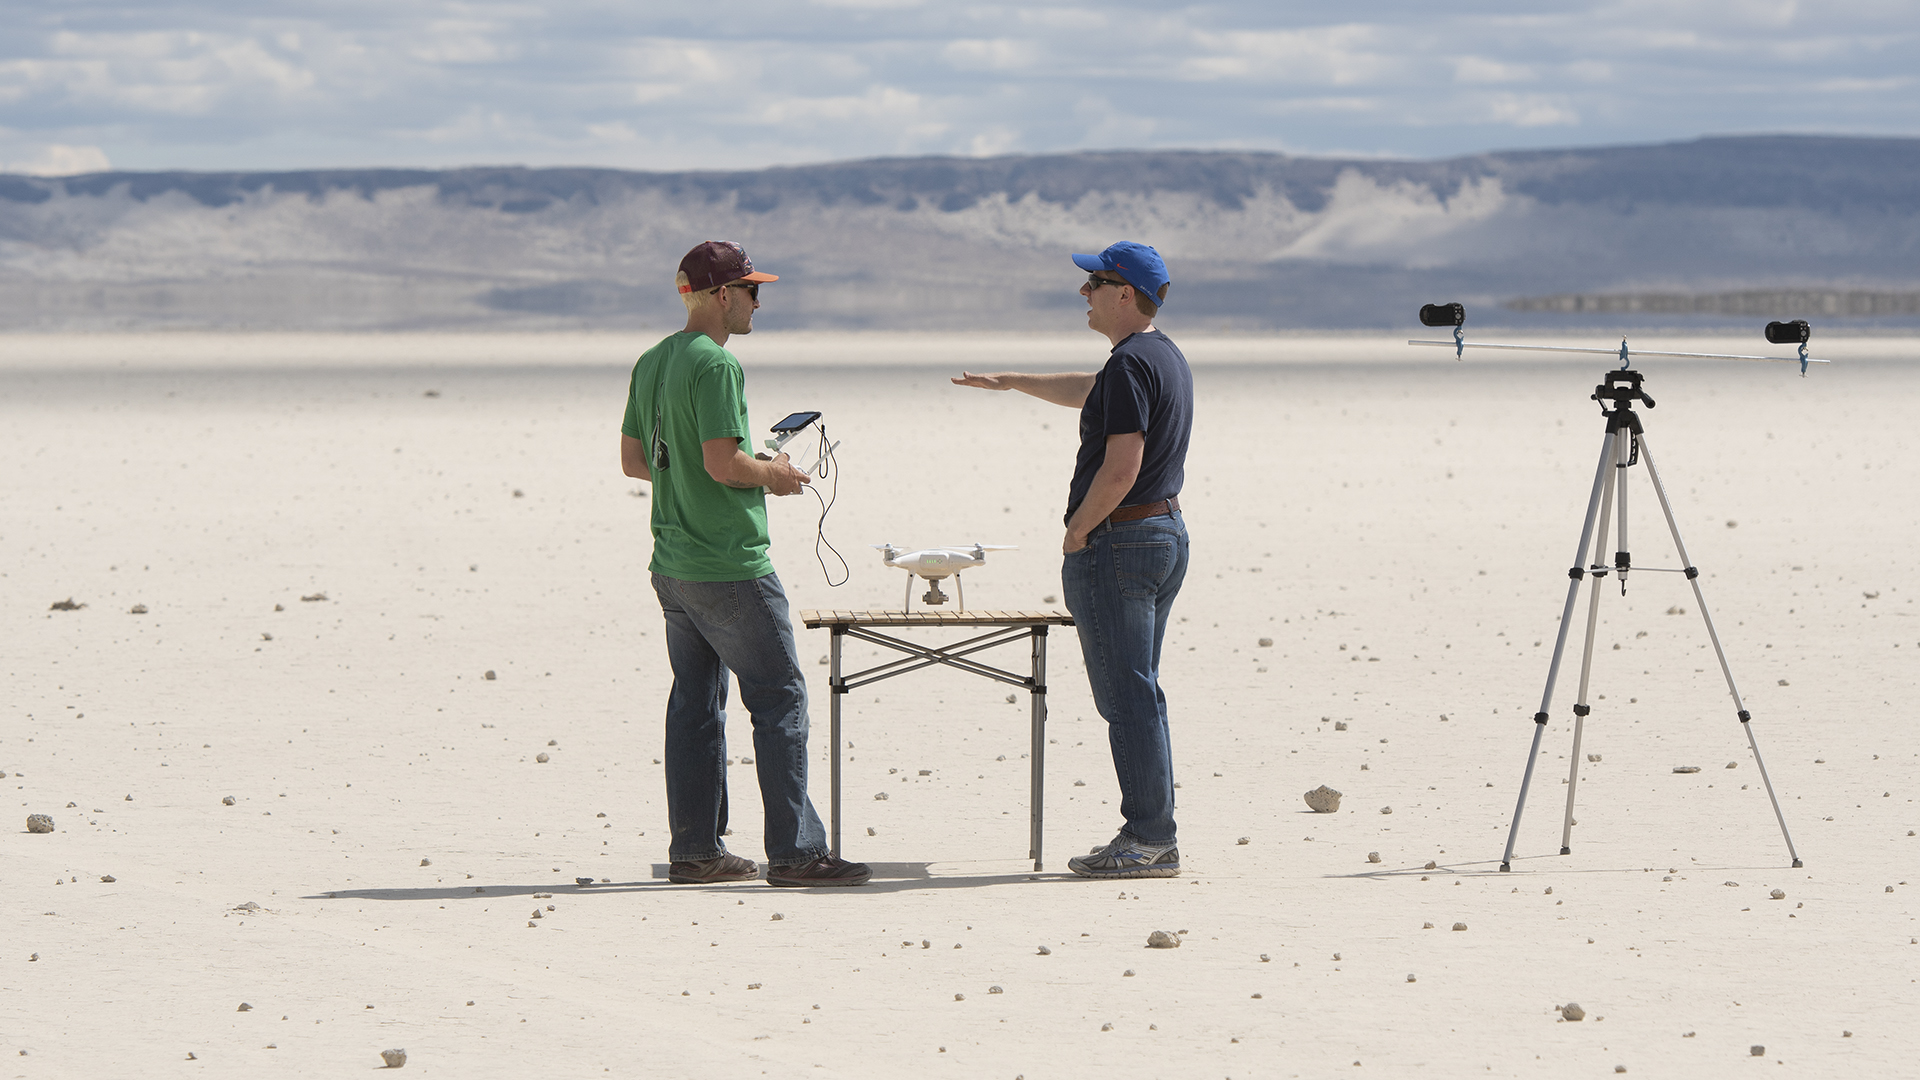 Researchers in dessert standing next to all the equipment